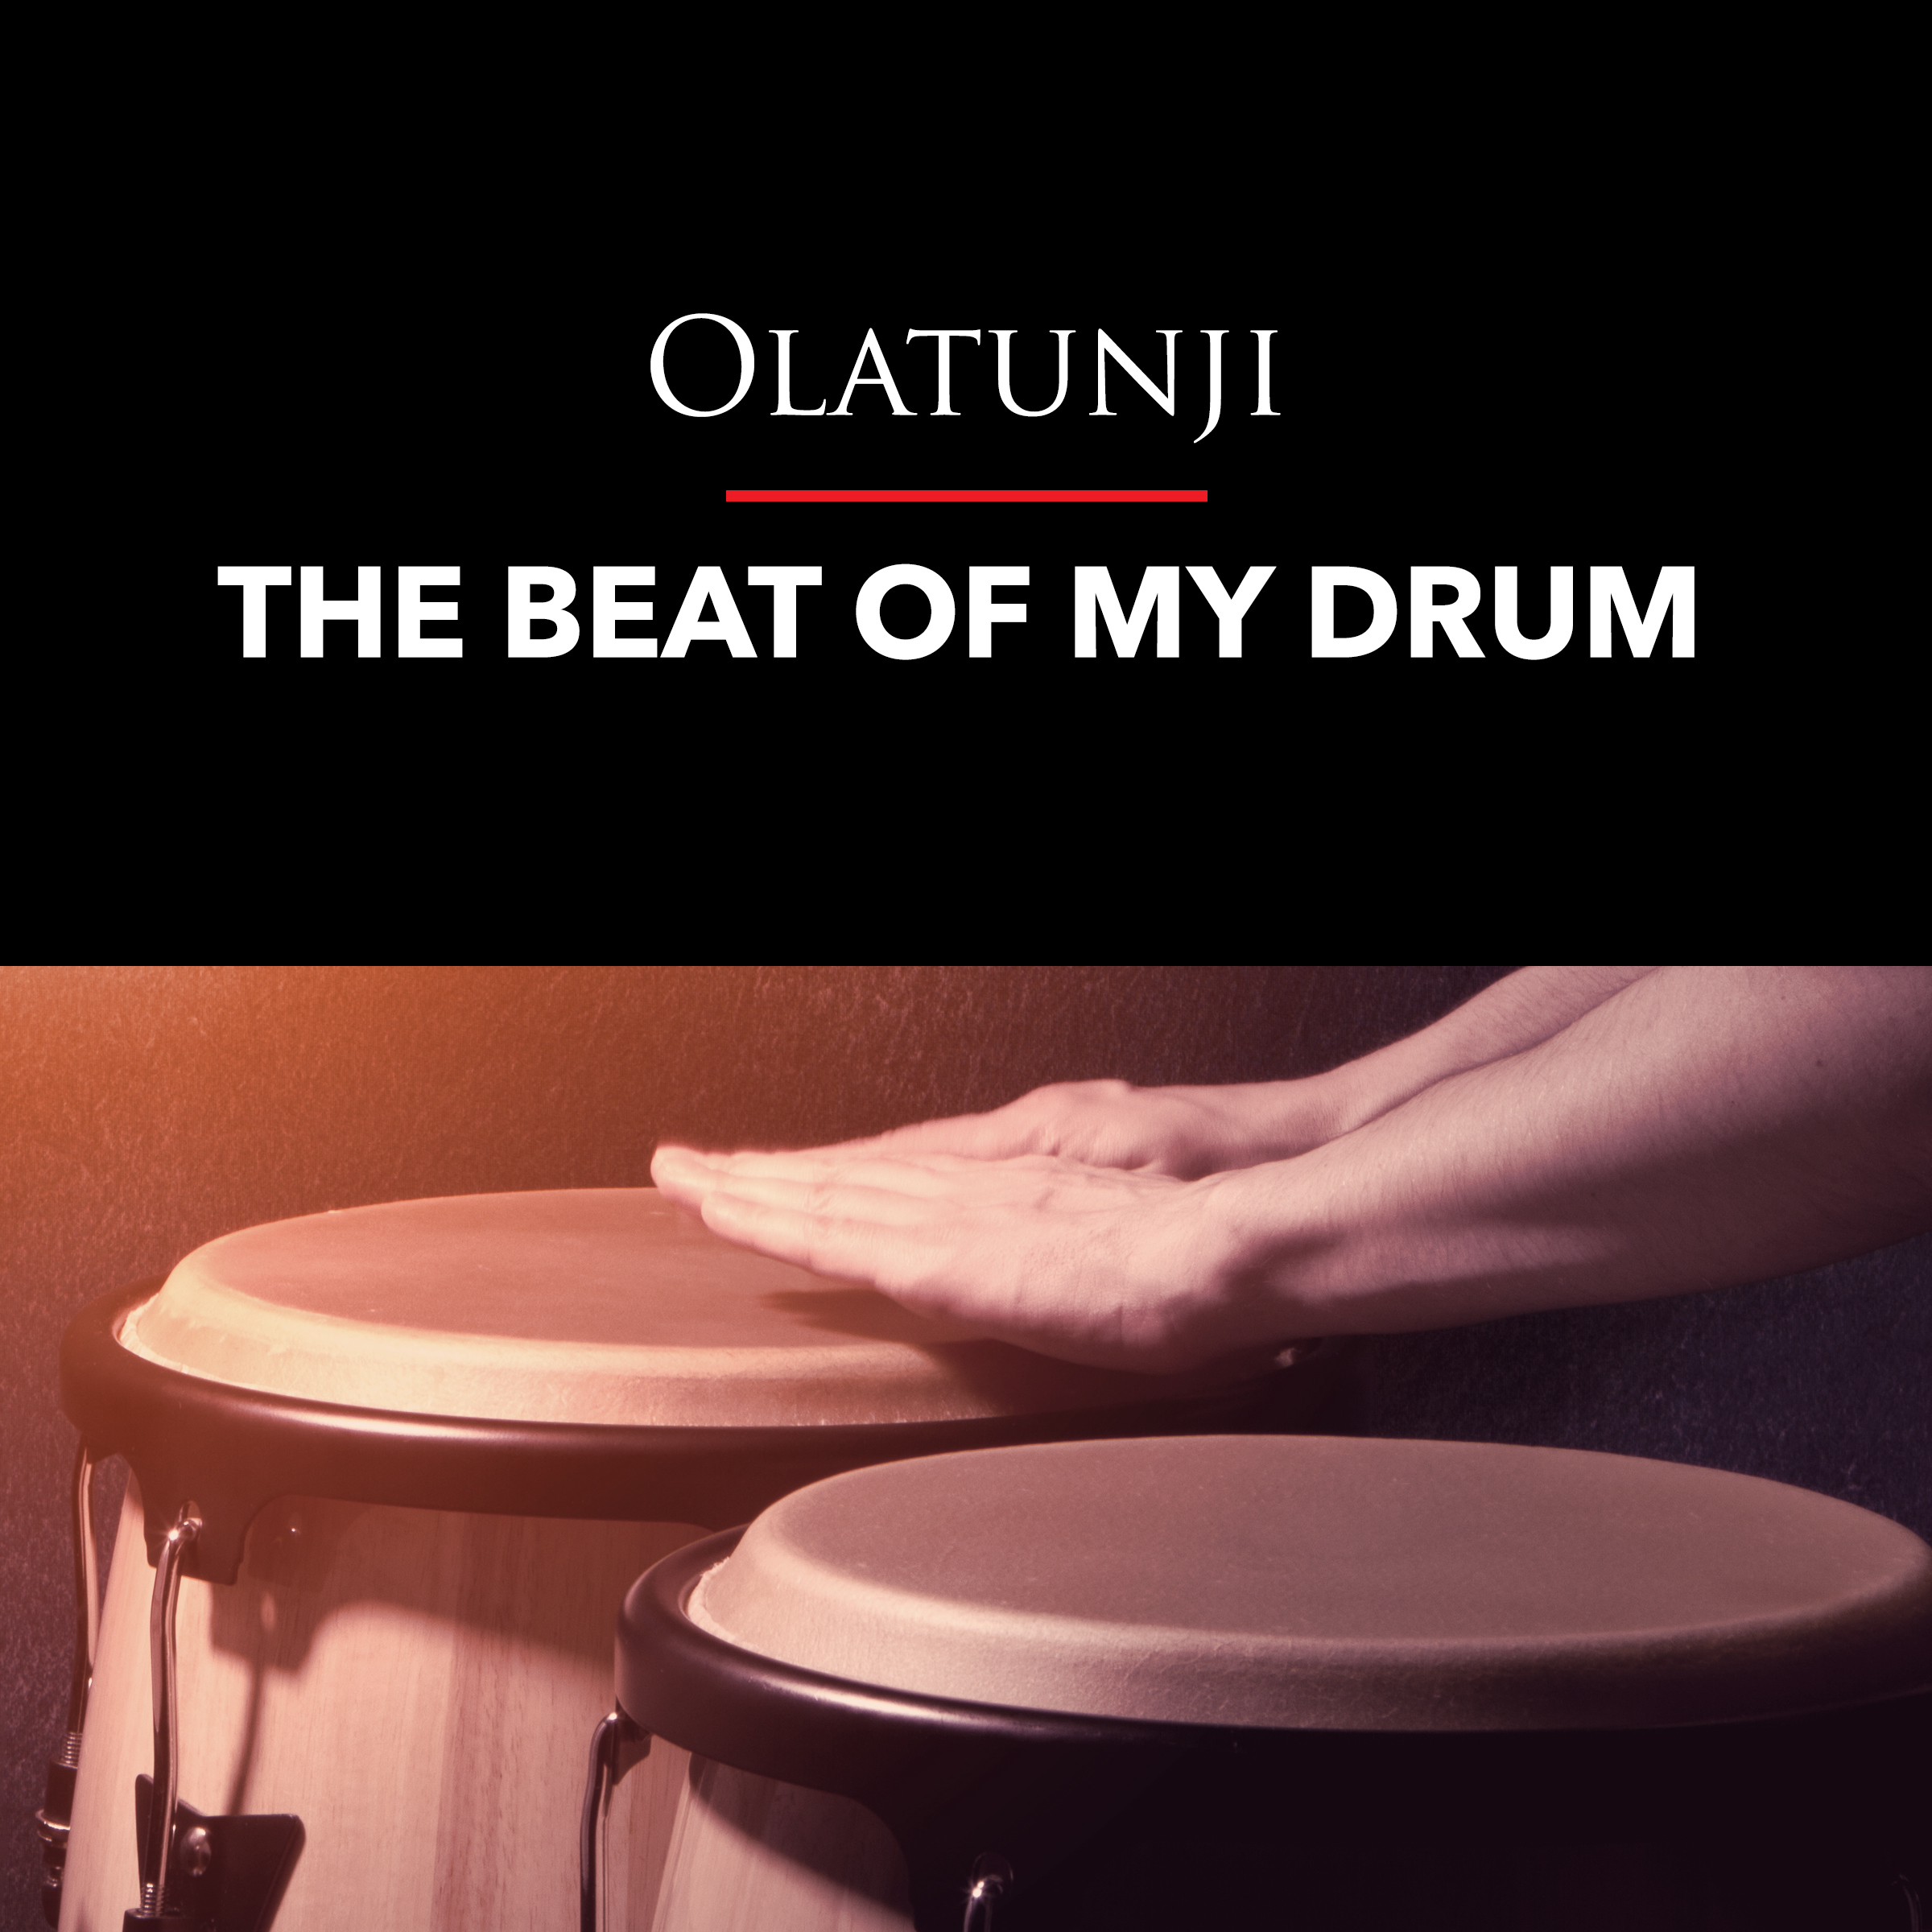 The Beat of My Drum